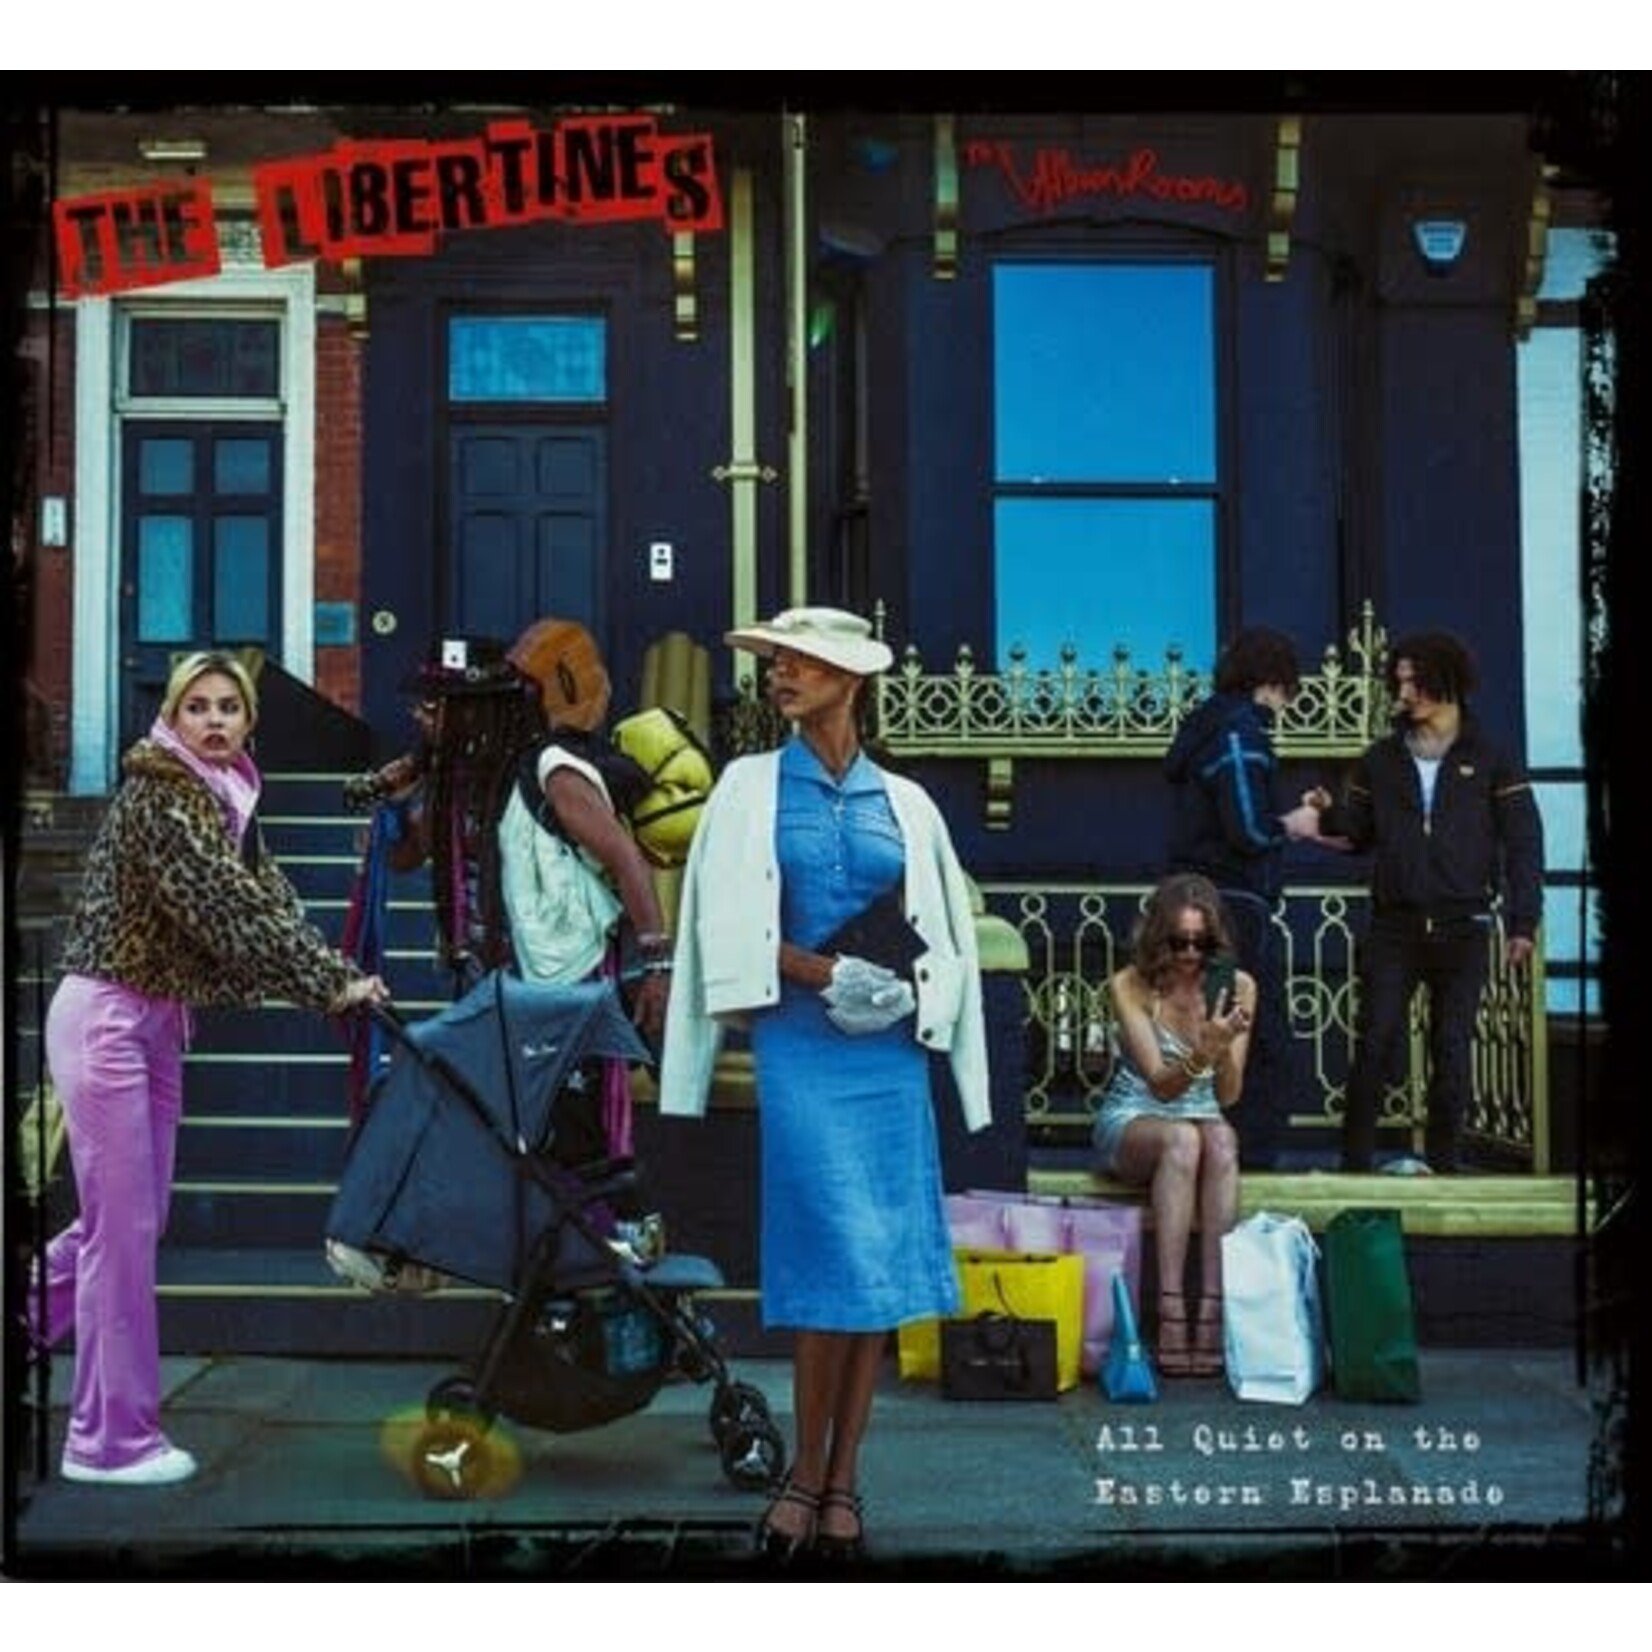 Republic Libertines - All Quiet on the Eastern Esplanade (2LP) [Clear]